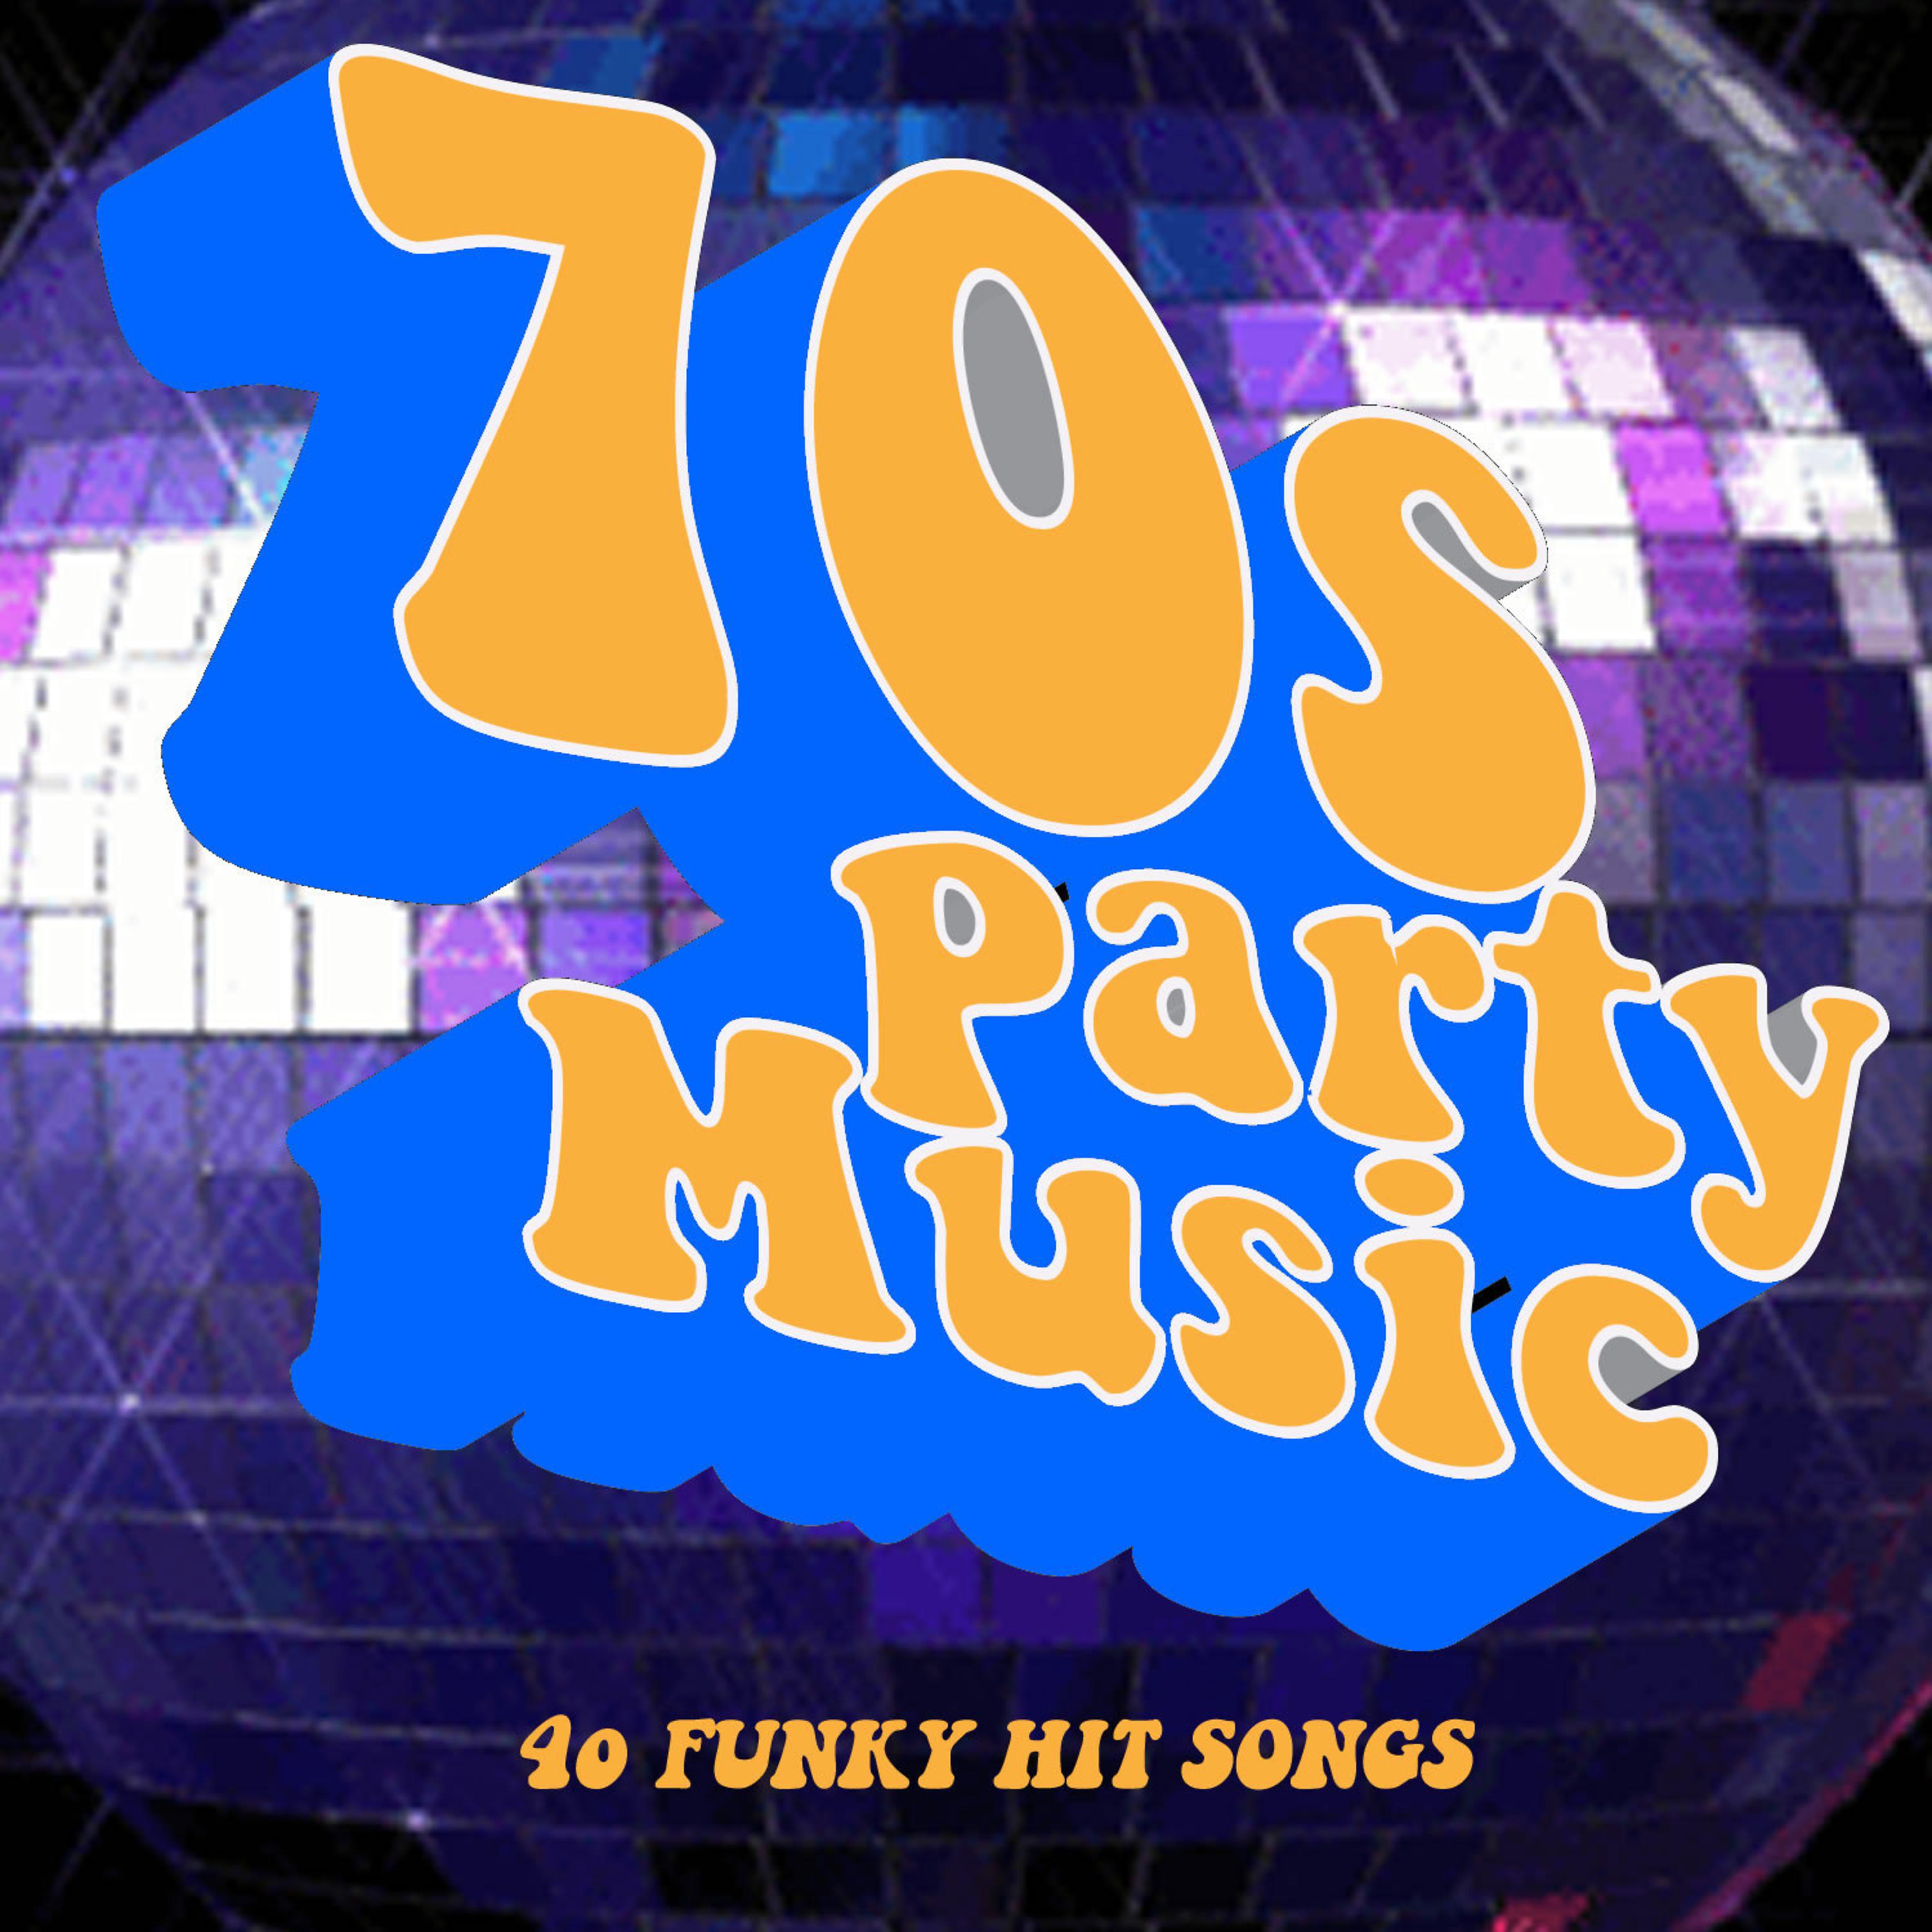 Постер альбома 70s Party Music: 40 Funky Hit Songs